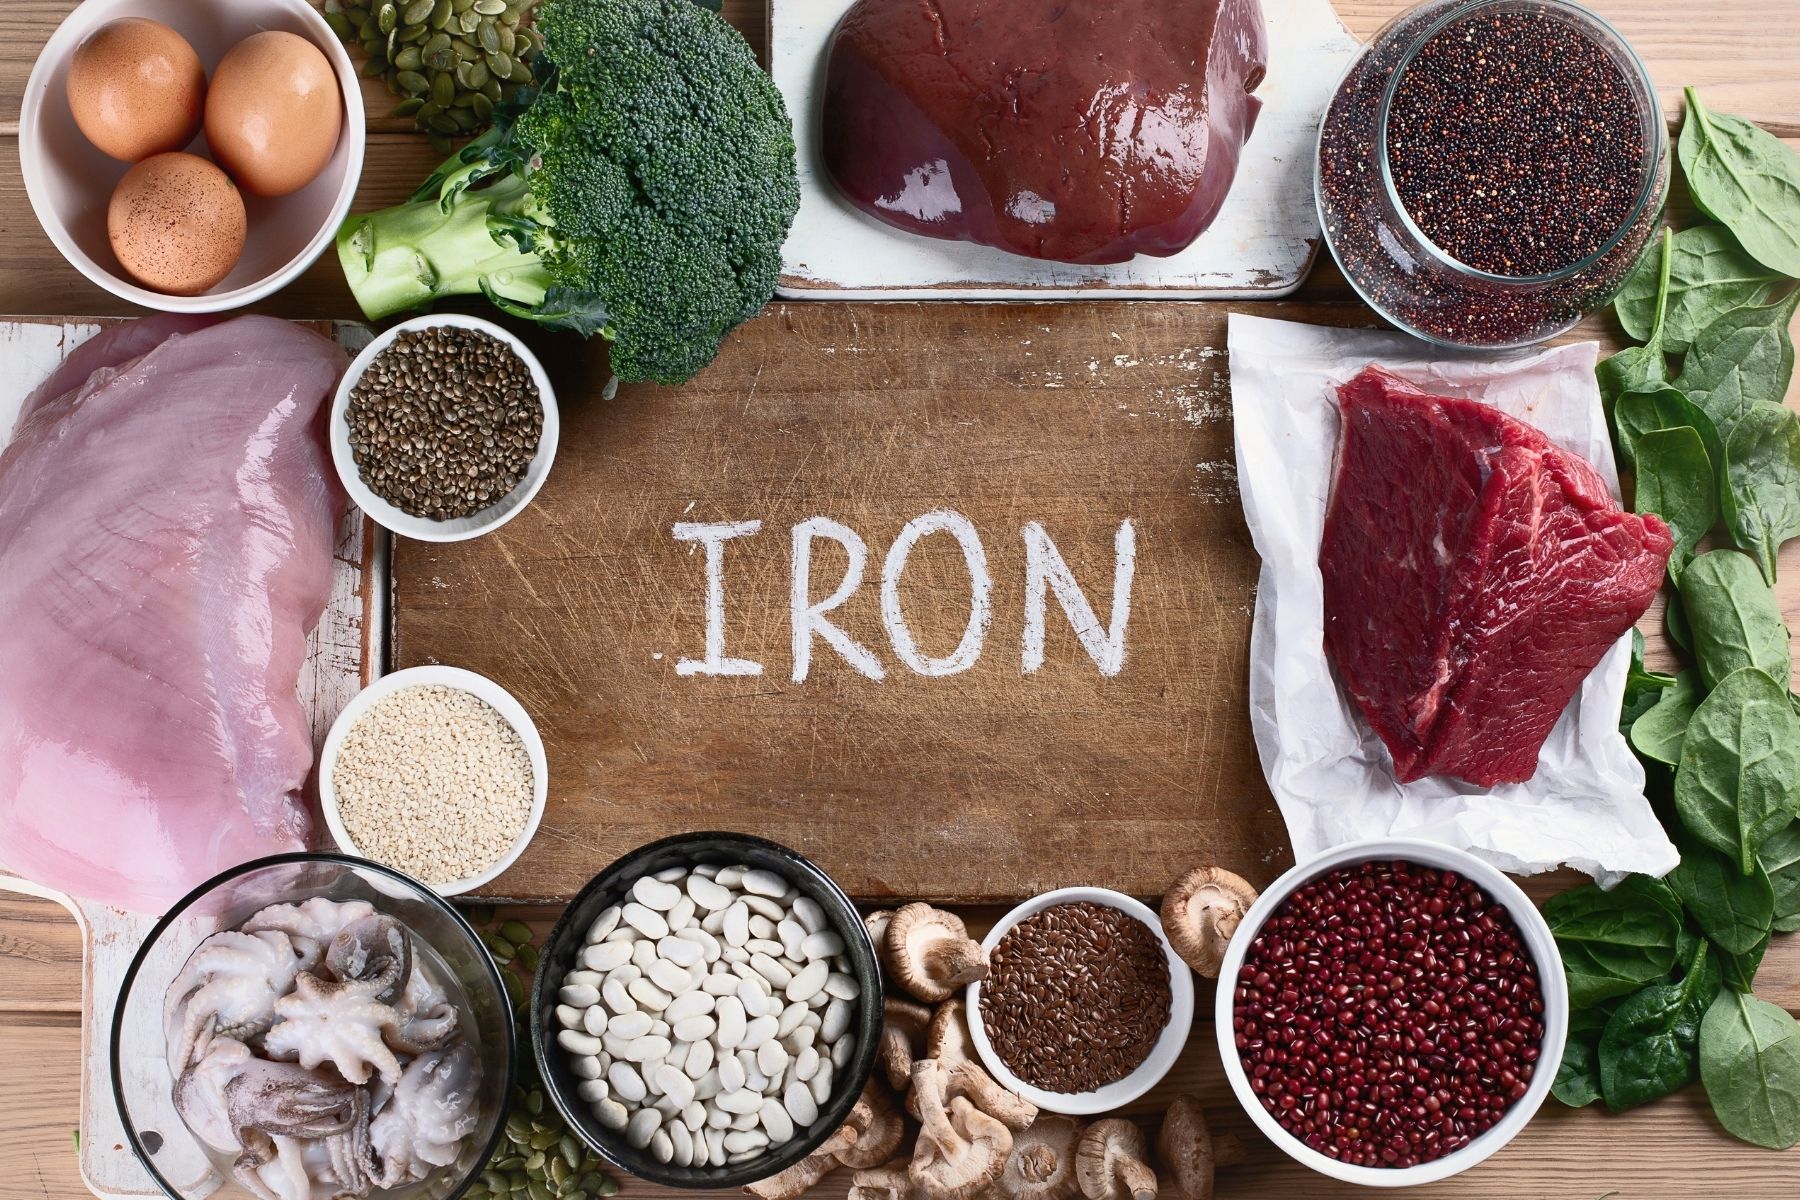 Foods that are rich in iron that you can add to your diet shown on wooden surface.